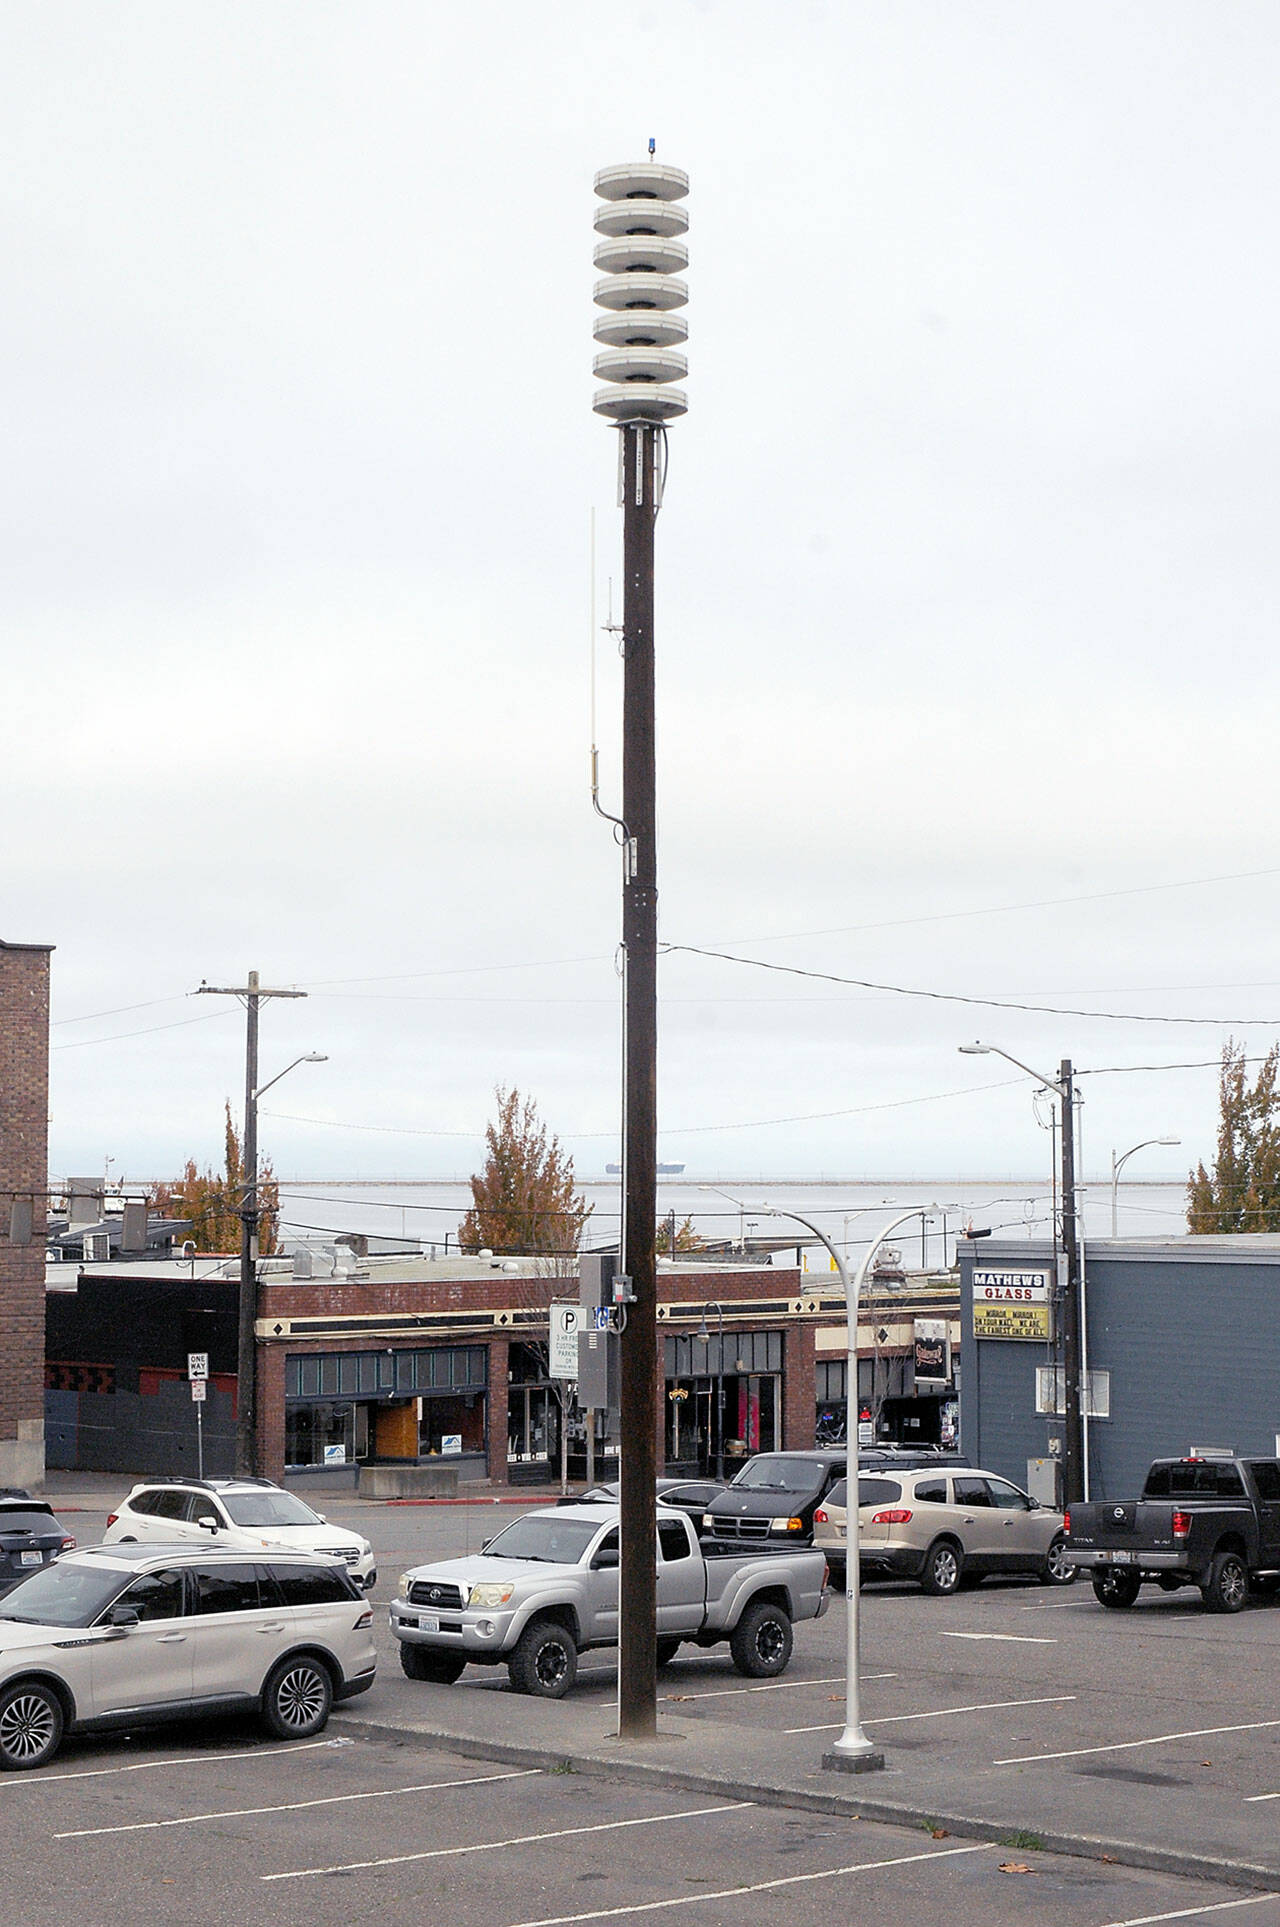 A tsunami alert siren in the public parking lot at First and Lincoln streets in downtown Port Angeles sounded during Thursday’s Great ShakeOut earthquake drill. (Keith Thorpe/Peninsula Daily News)